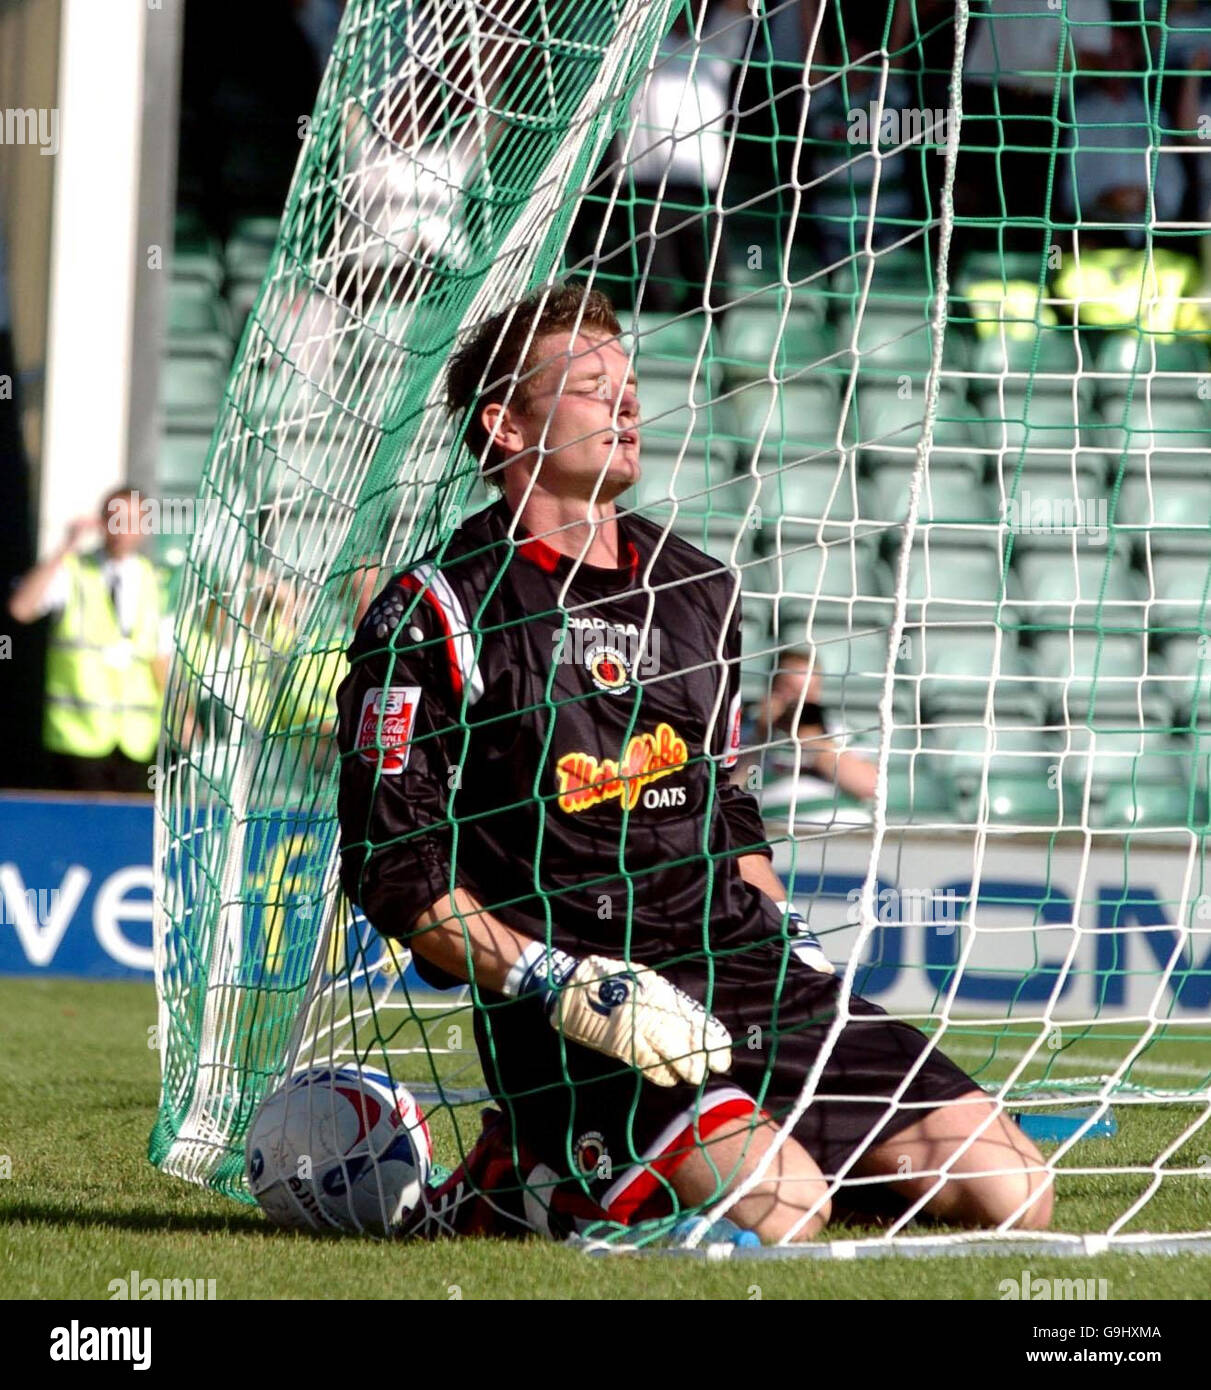 Soccer - League One match - Yeovil v Crewe.. Crewe Alexandra goalkeeper Ben Williams looks dejected following a goal by Yeovil during the League One match at Huish Park, Yeovil. Stock Photo